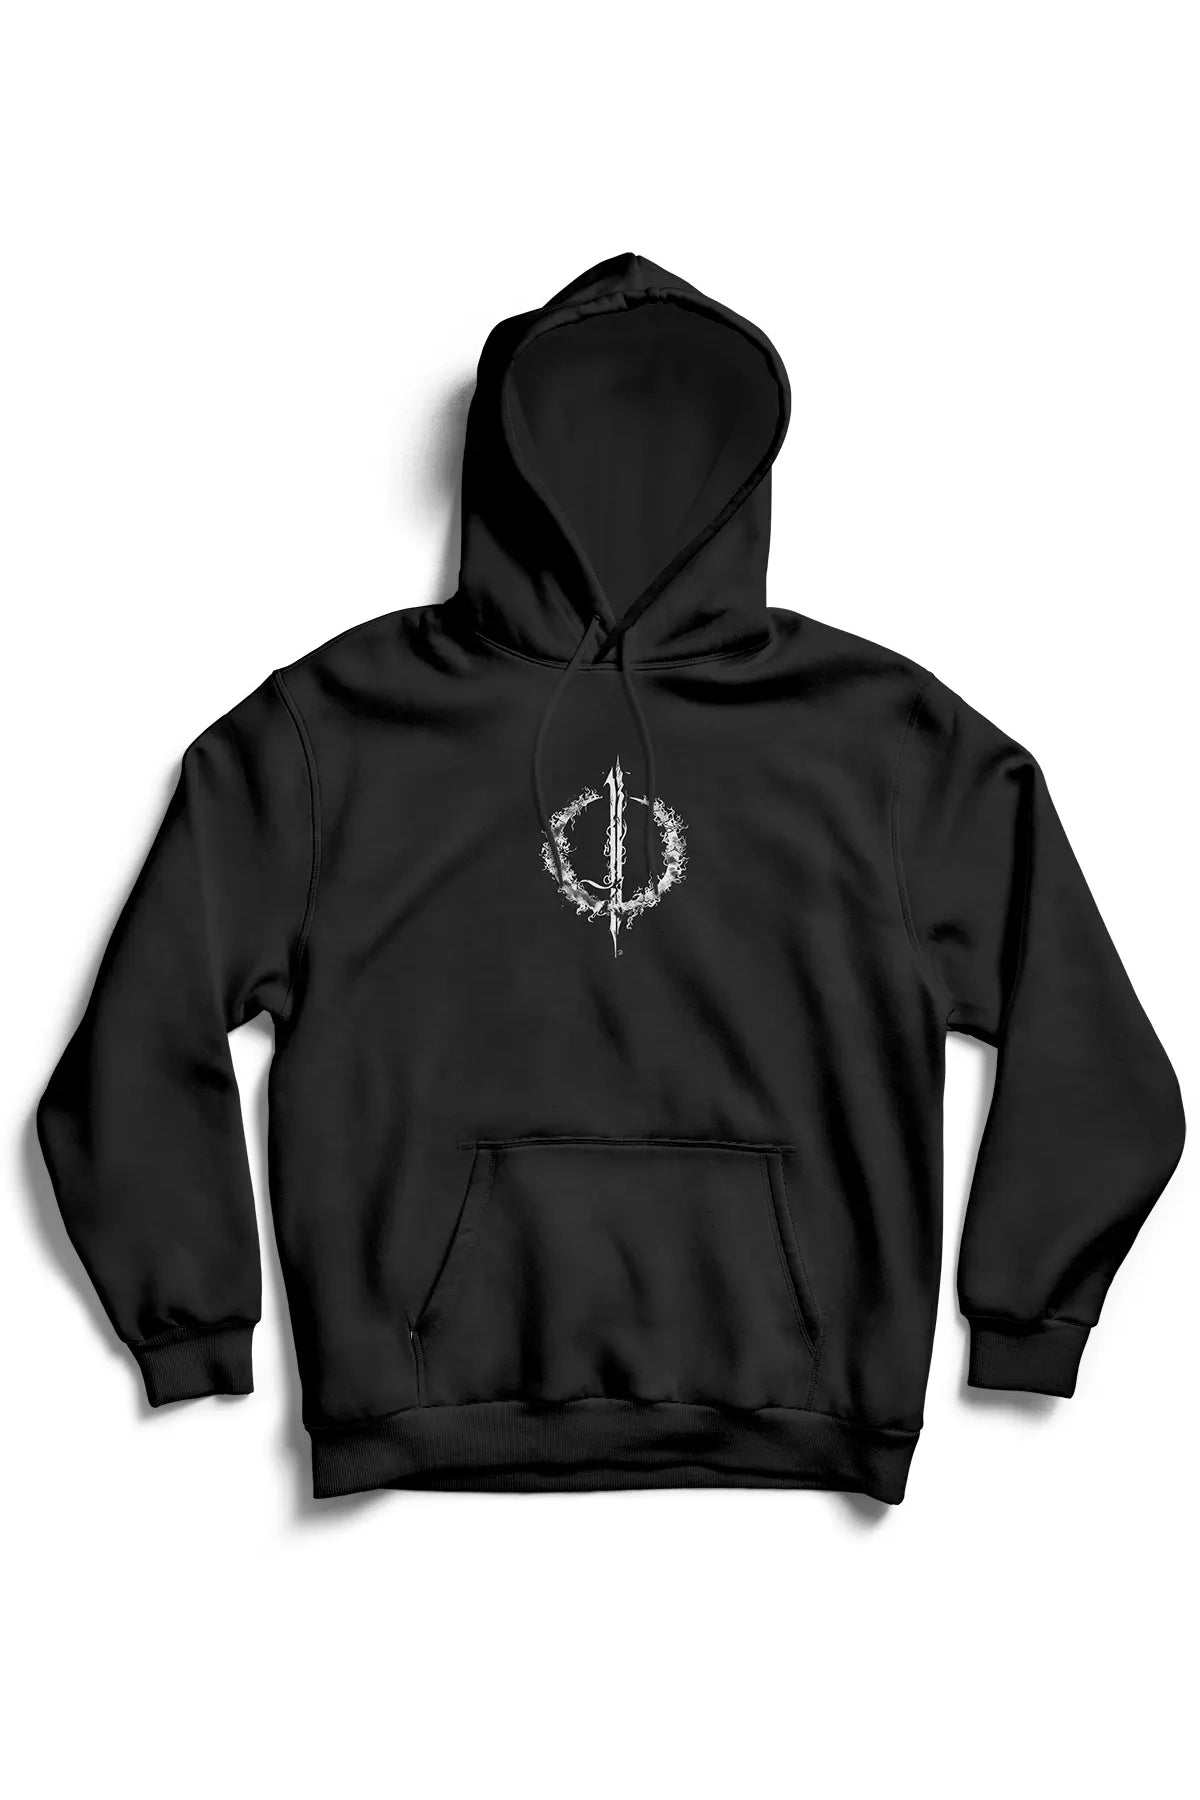 The Enferno Coming Home Hoodie in Black.